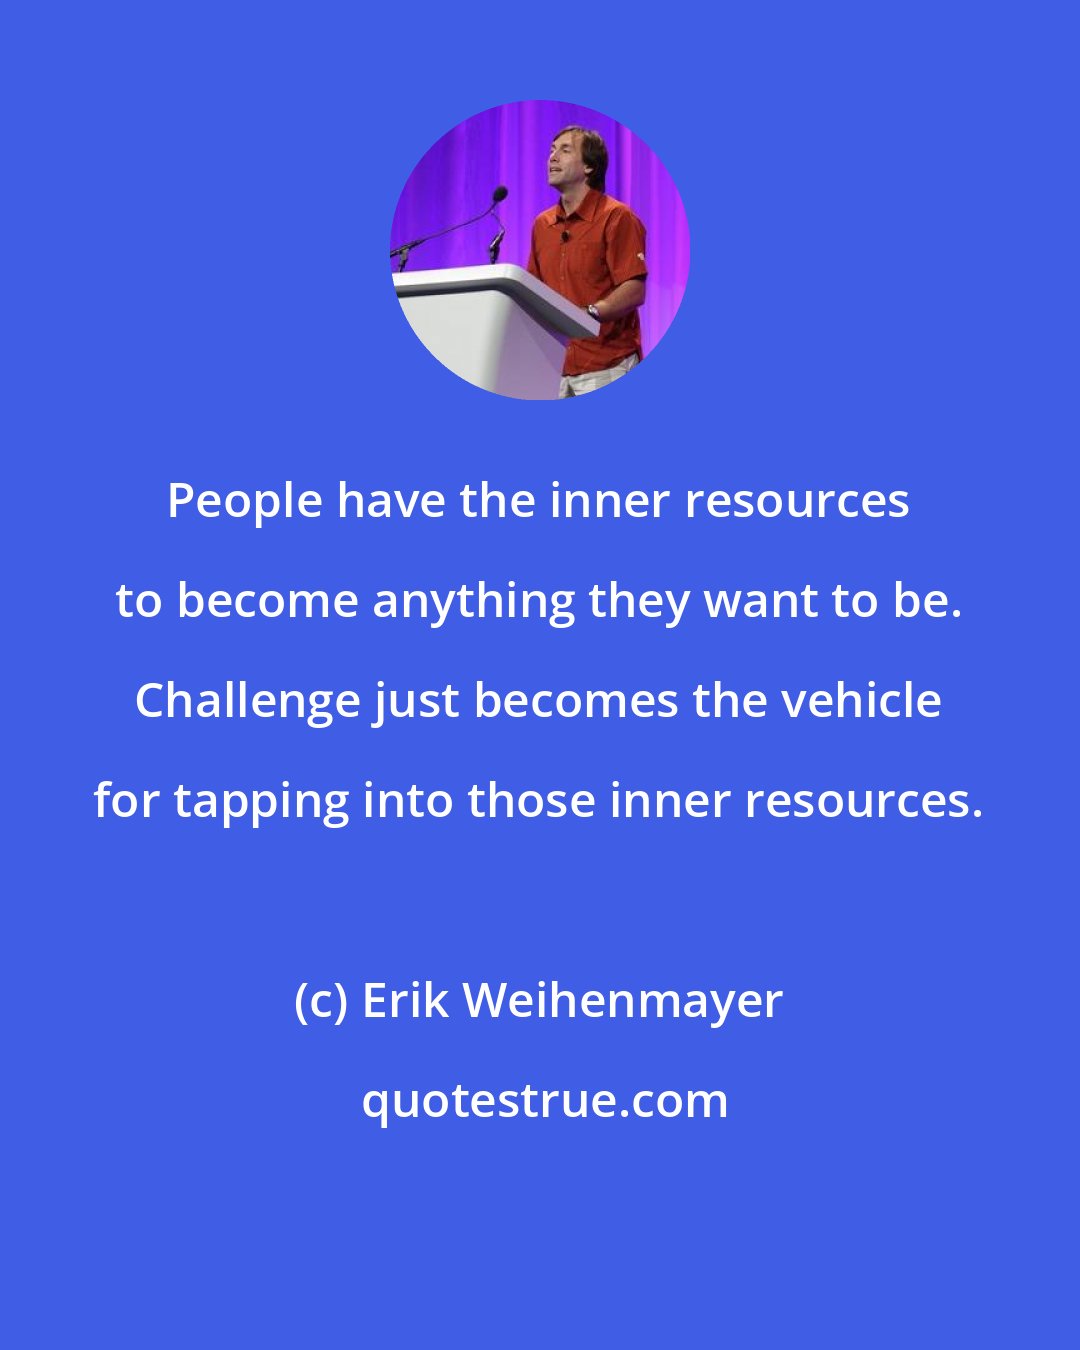 Erik Weihenmayer: People have the inner resources to become anything they want to be. Challenge just becomes the vehicle for tapping into those inner resources.